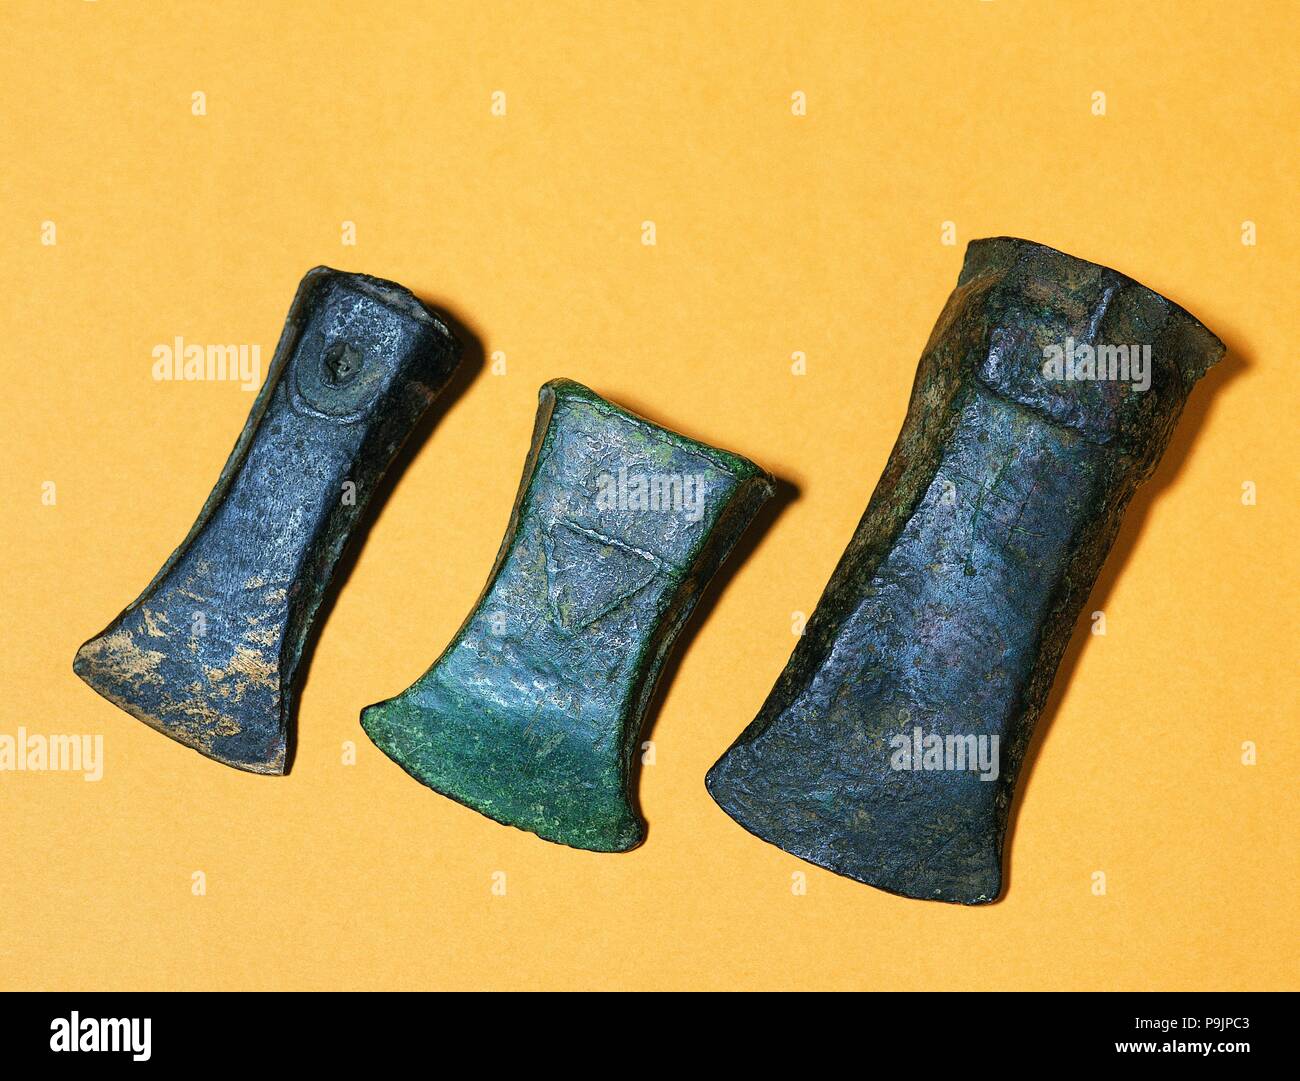 Tubular axes, from the sites 'The Brull' and 'La Plana de Vic'. Stock Photo